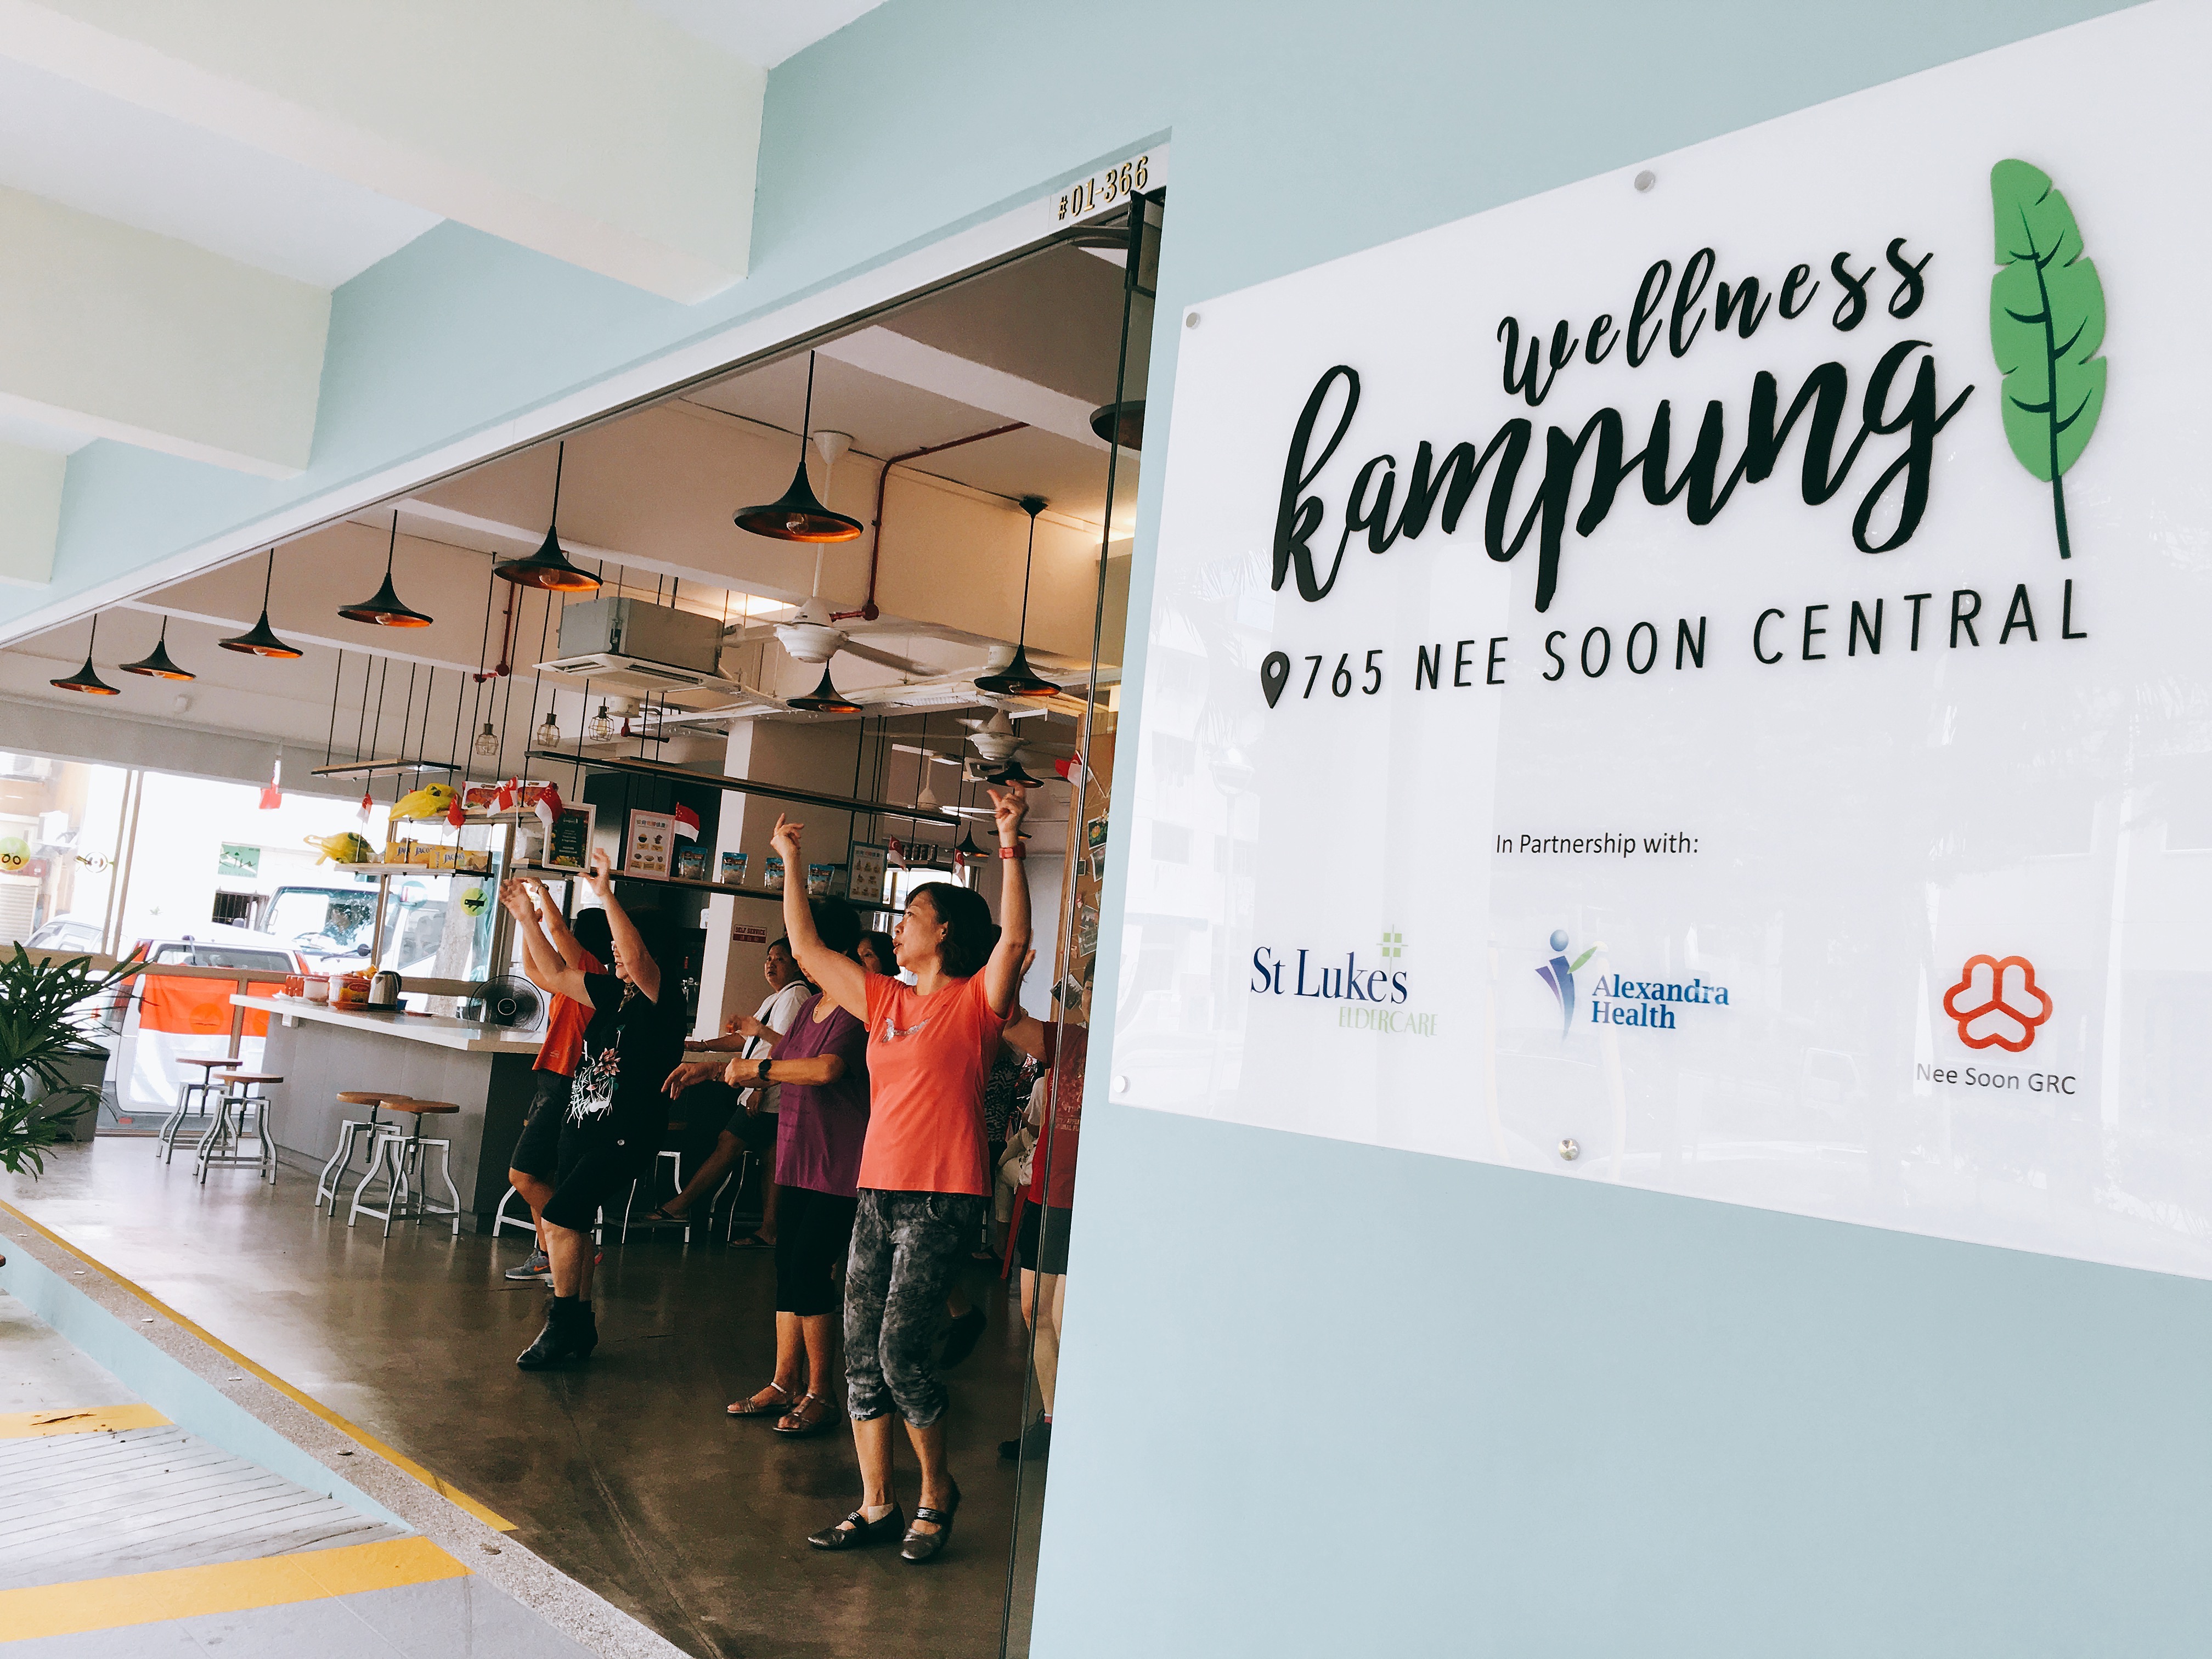 A group of residents exercise at the Wellness Kampung. The Wellness Kampung logo is prominently shown